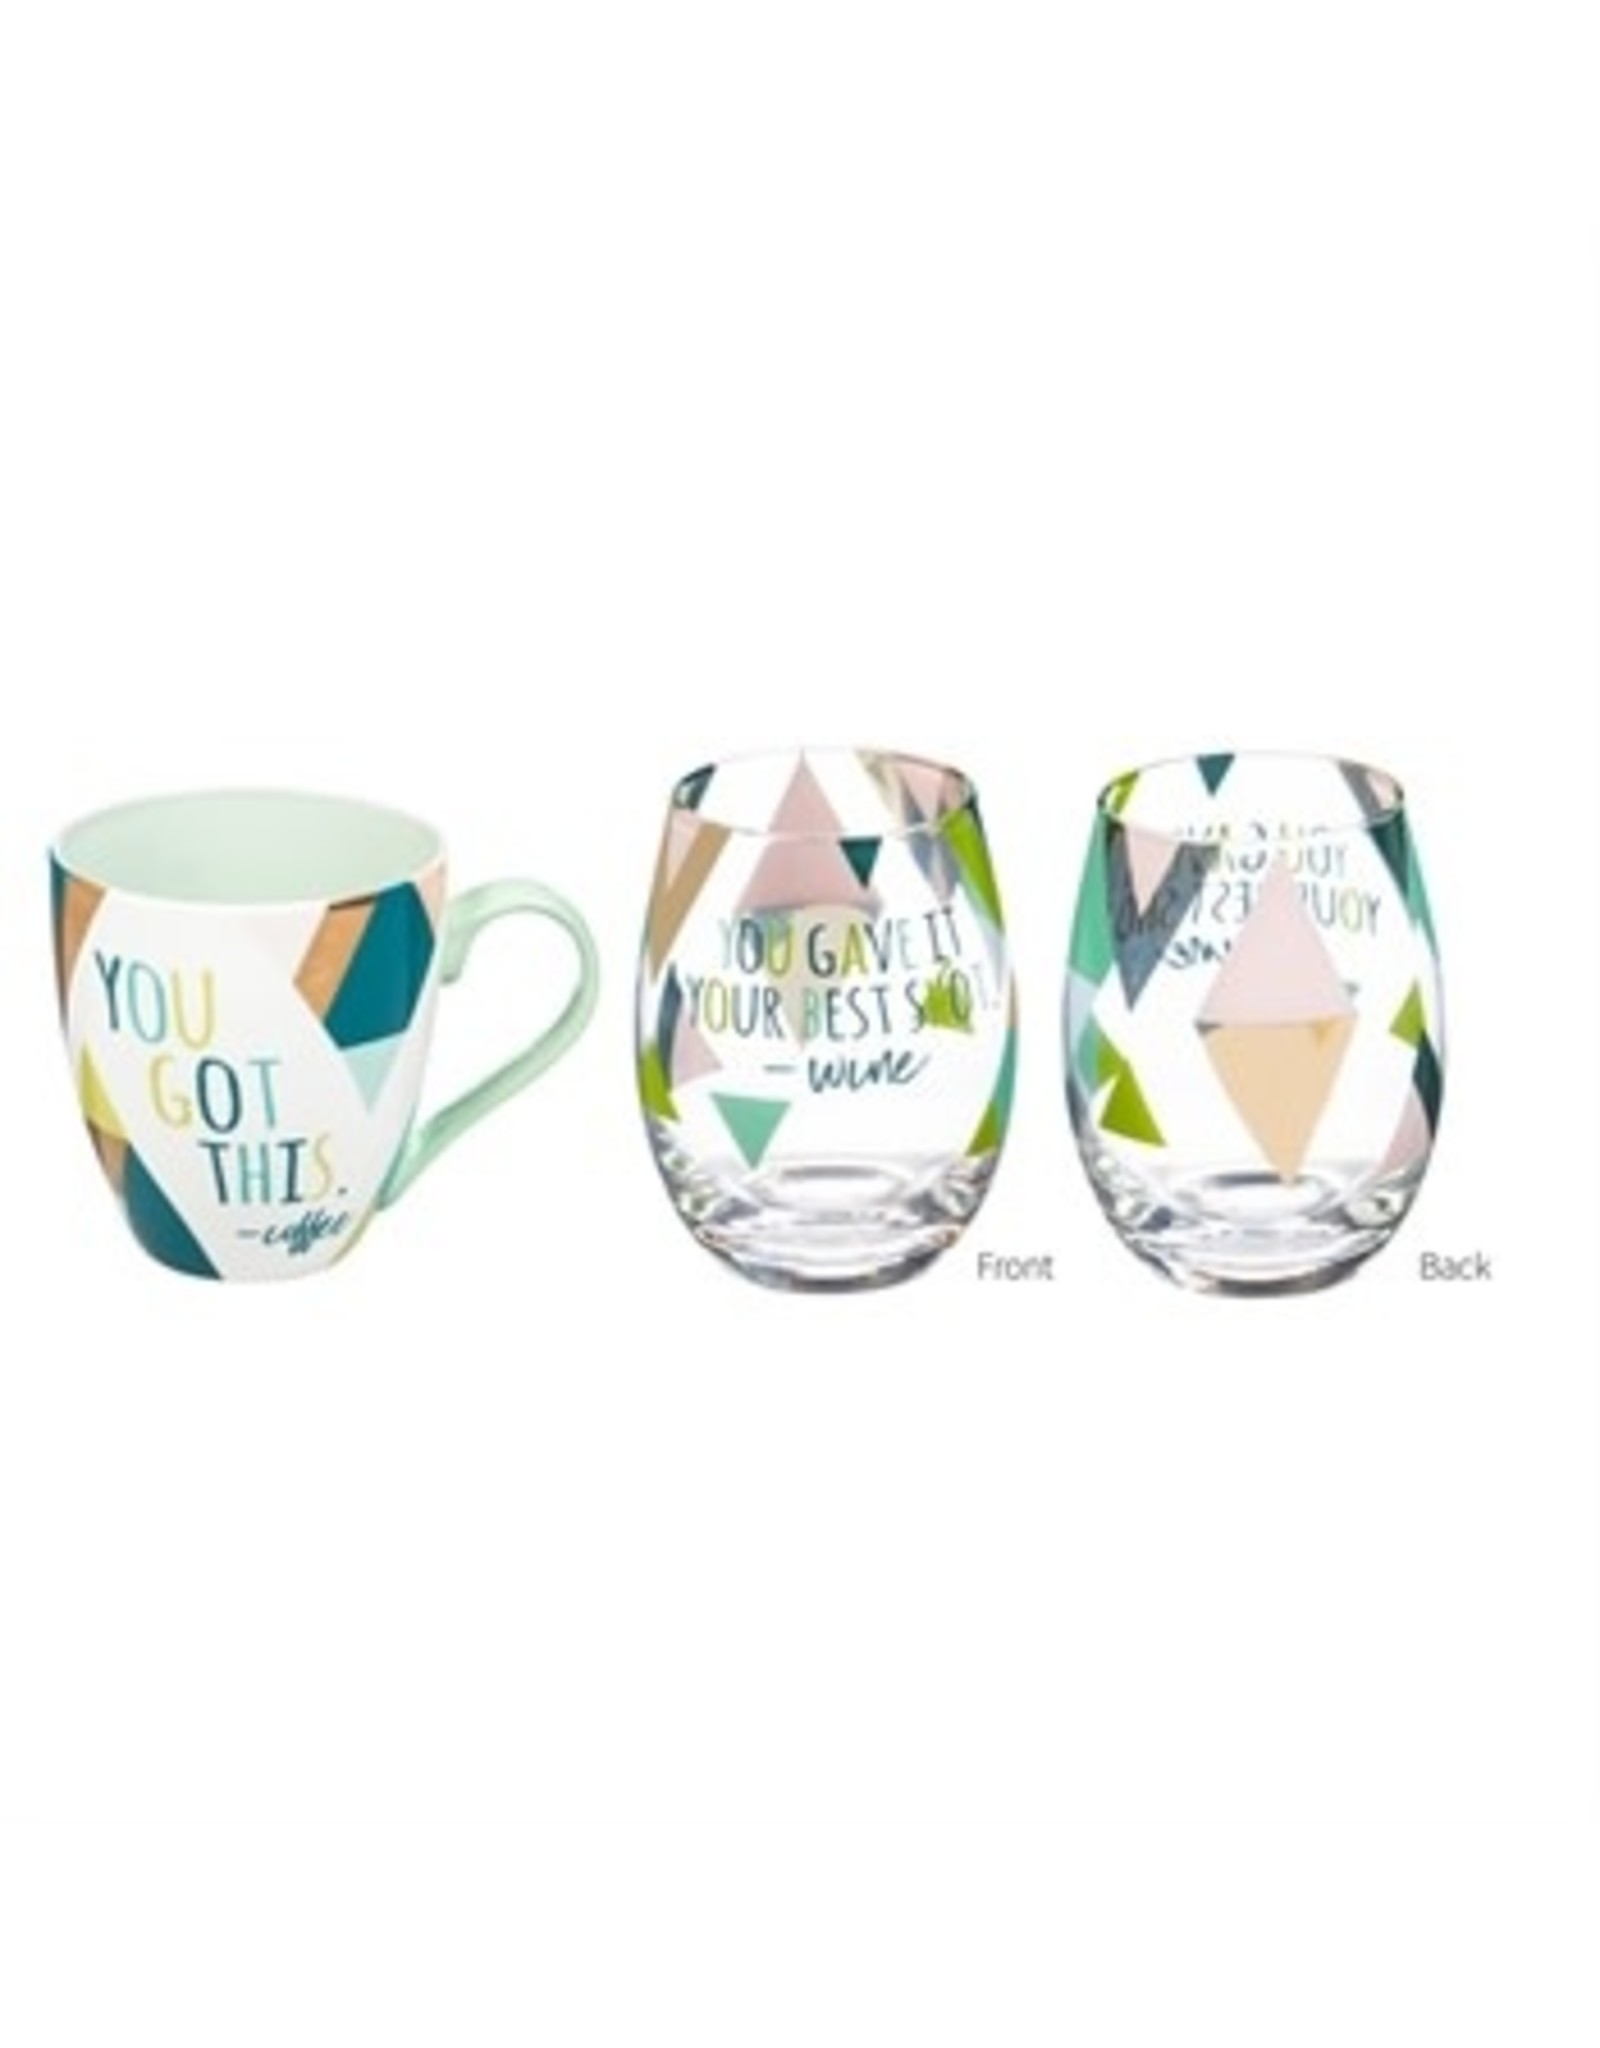 Evergreen Enterprises Cup & Stemless Wine Gift Set-You Gave It Your Best Shot